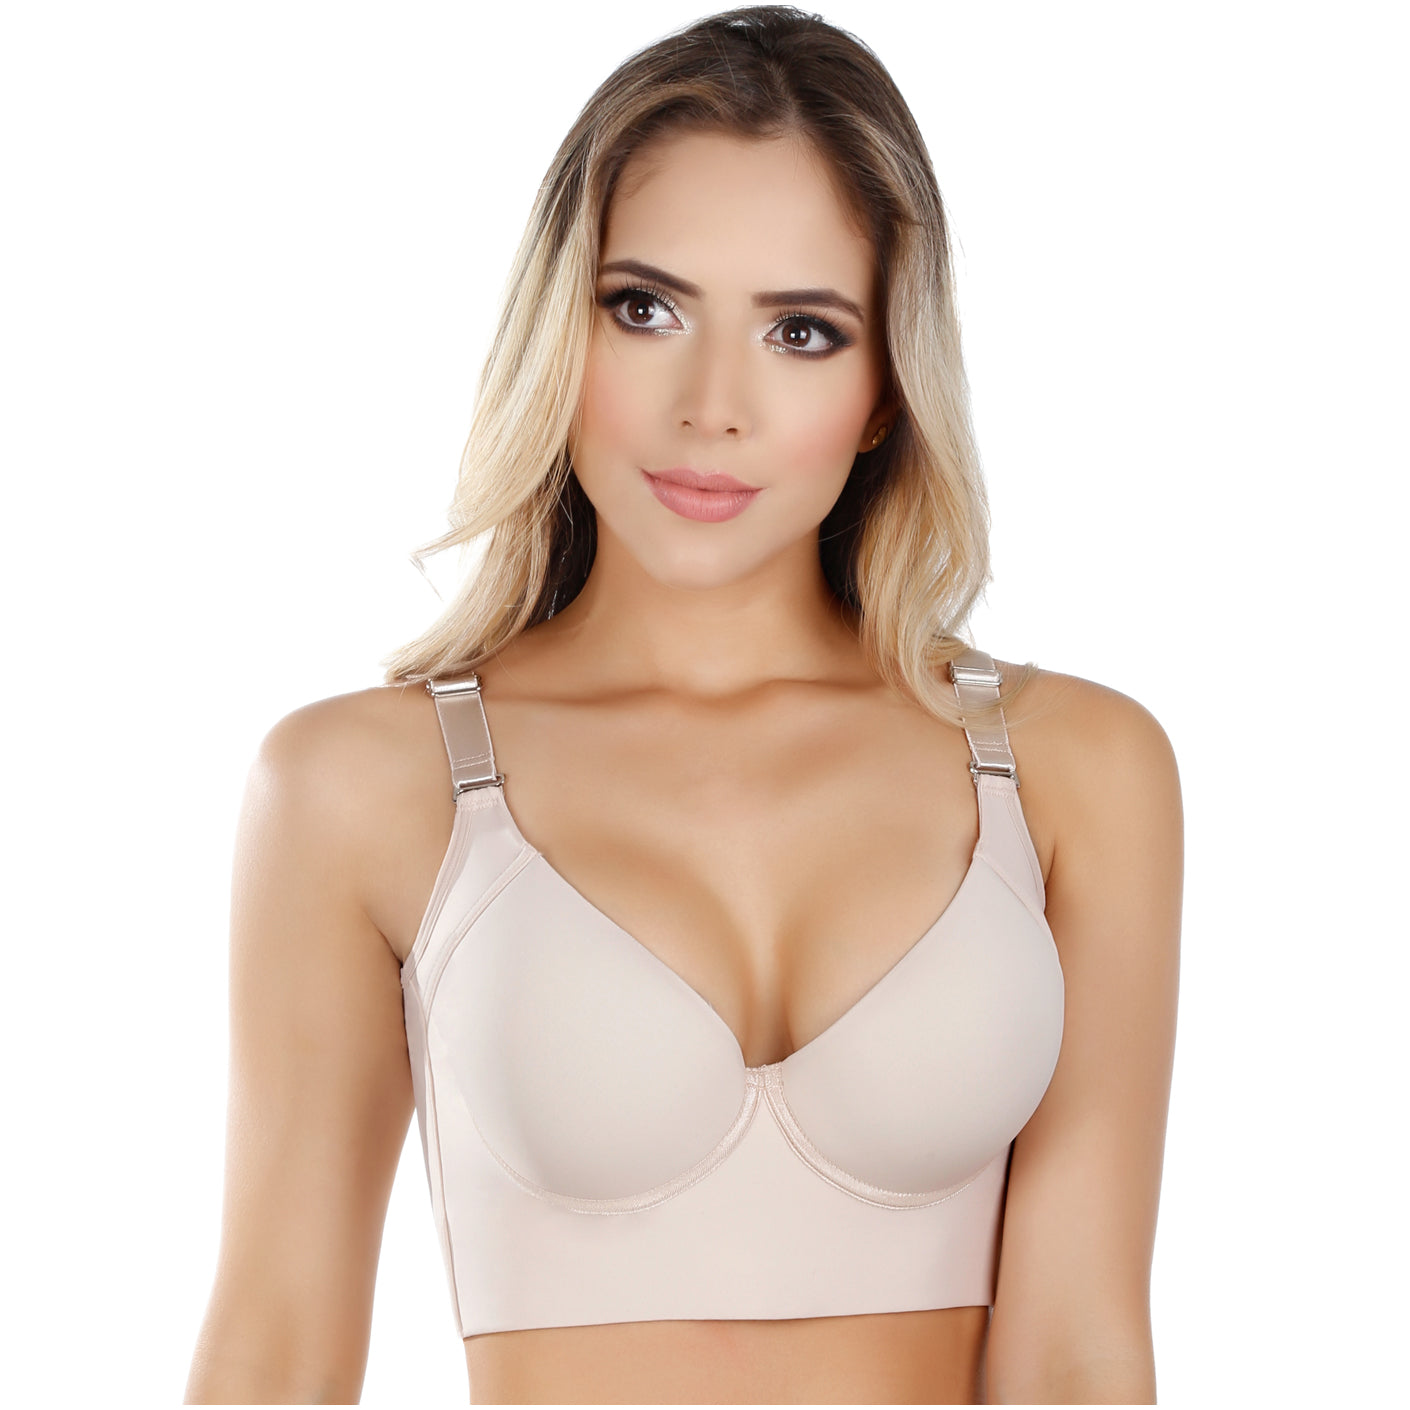 UpLady 8532, Extra Firm High Compression Full Cup Push Up Bra